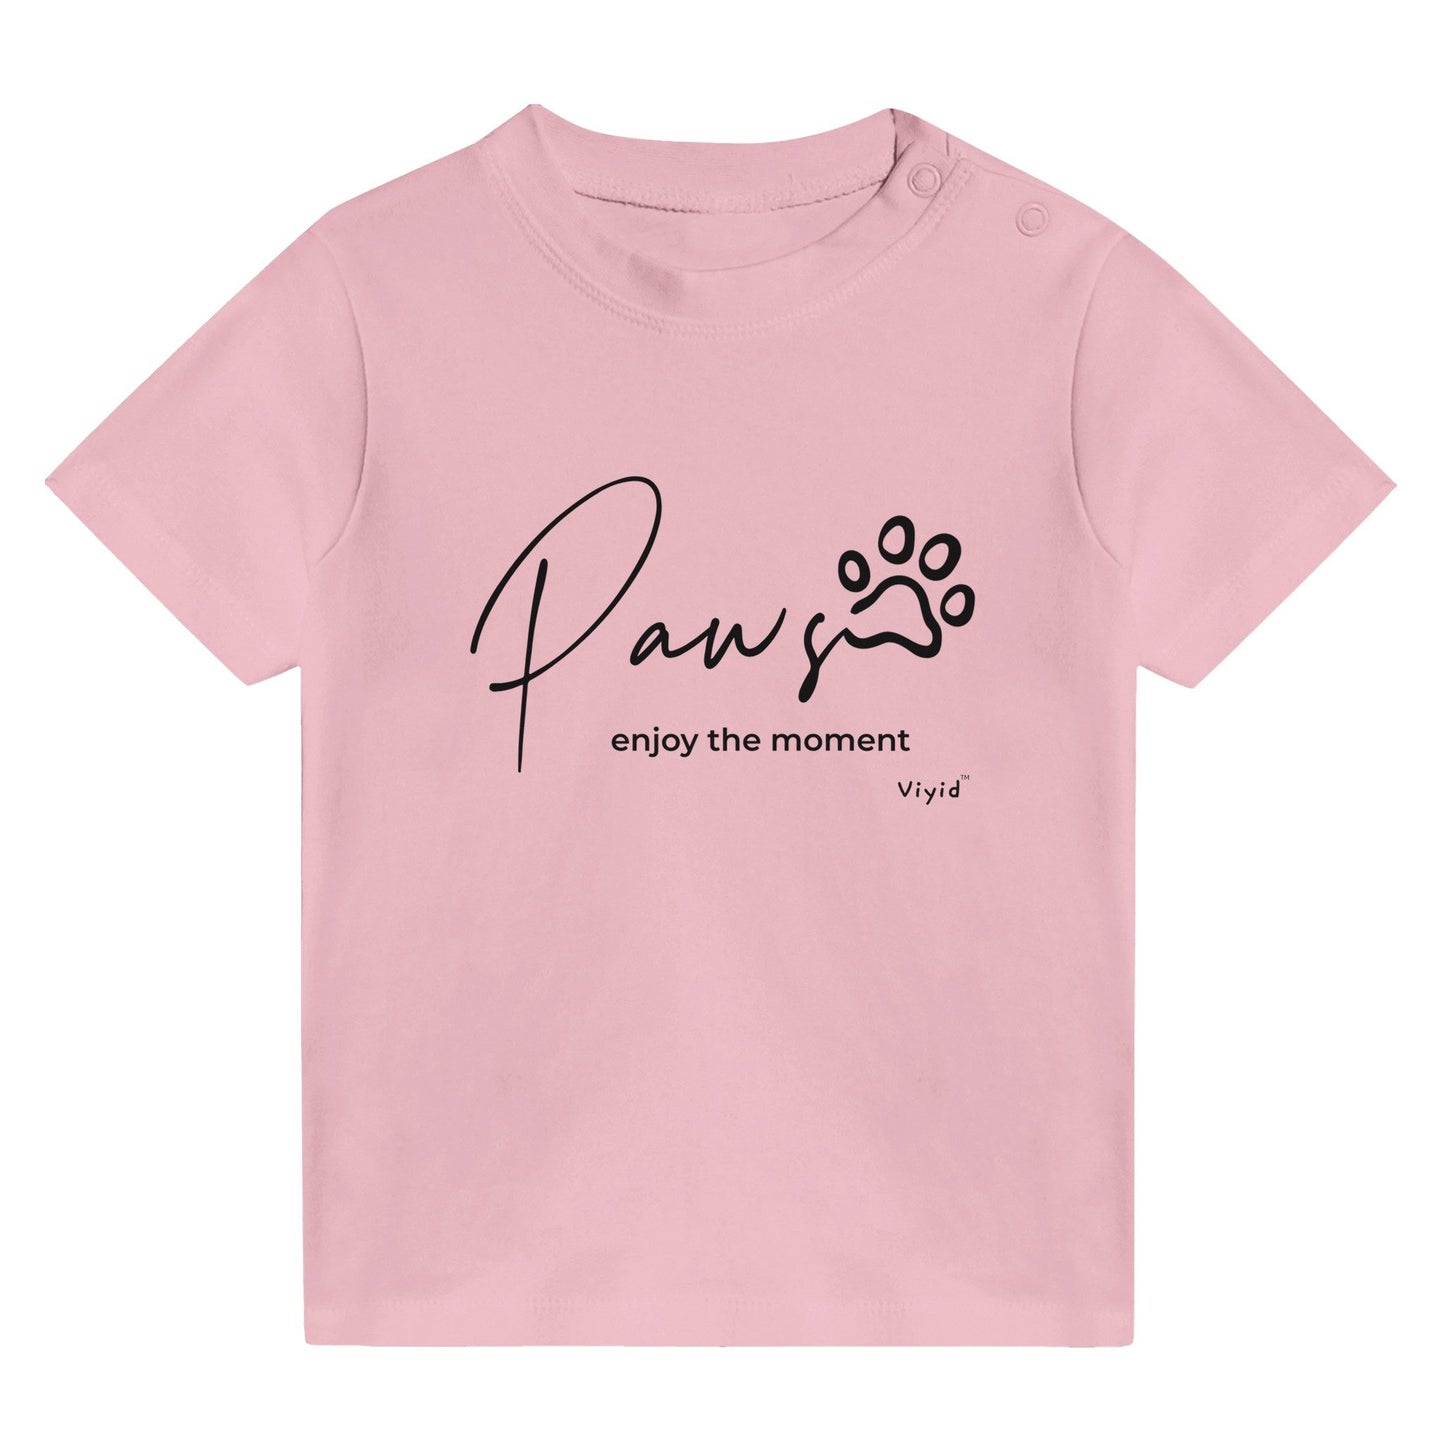 paws enjoy the moment baby t-shirt pink